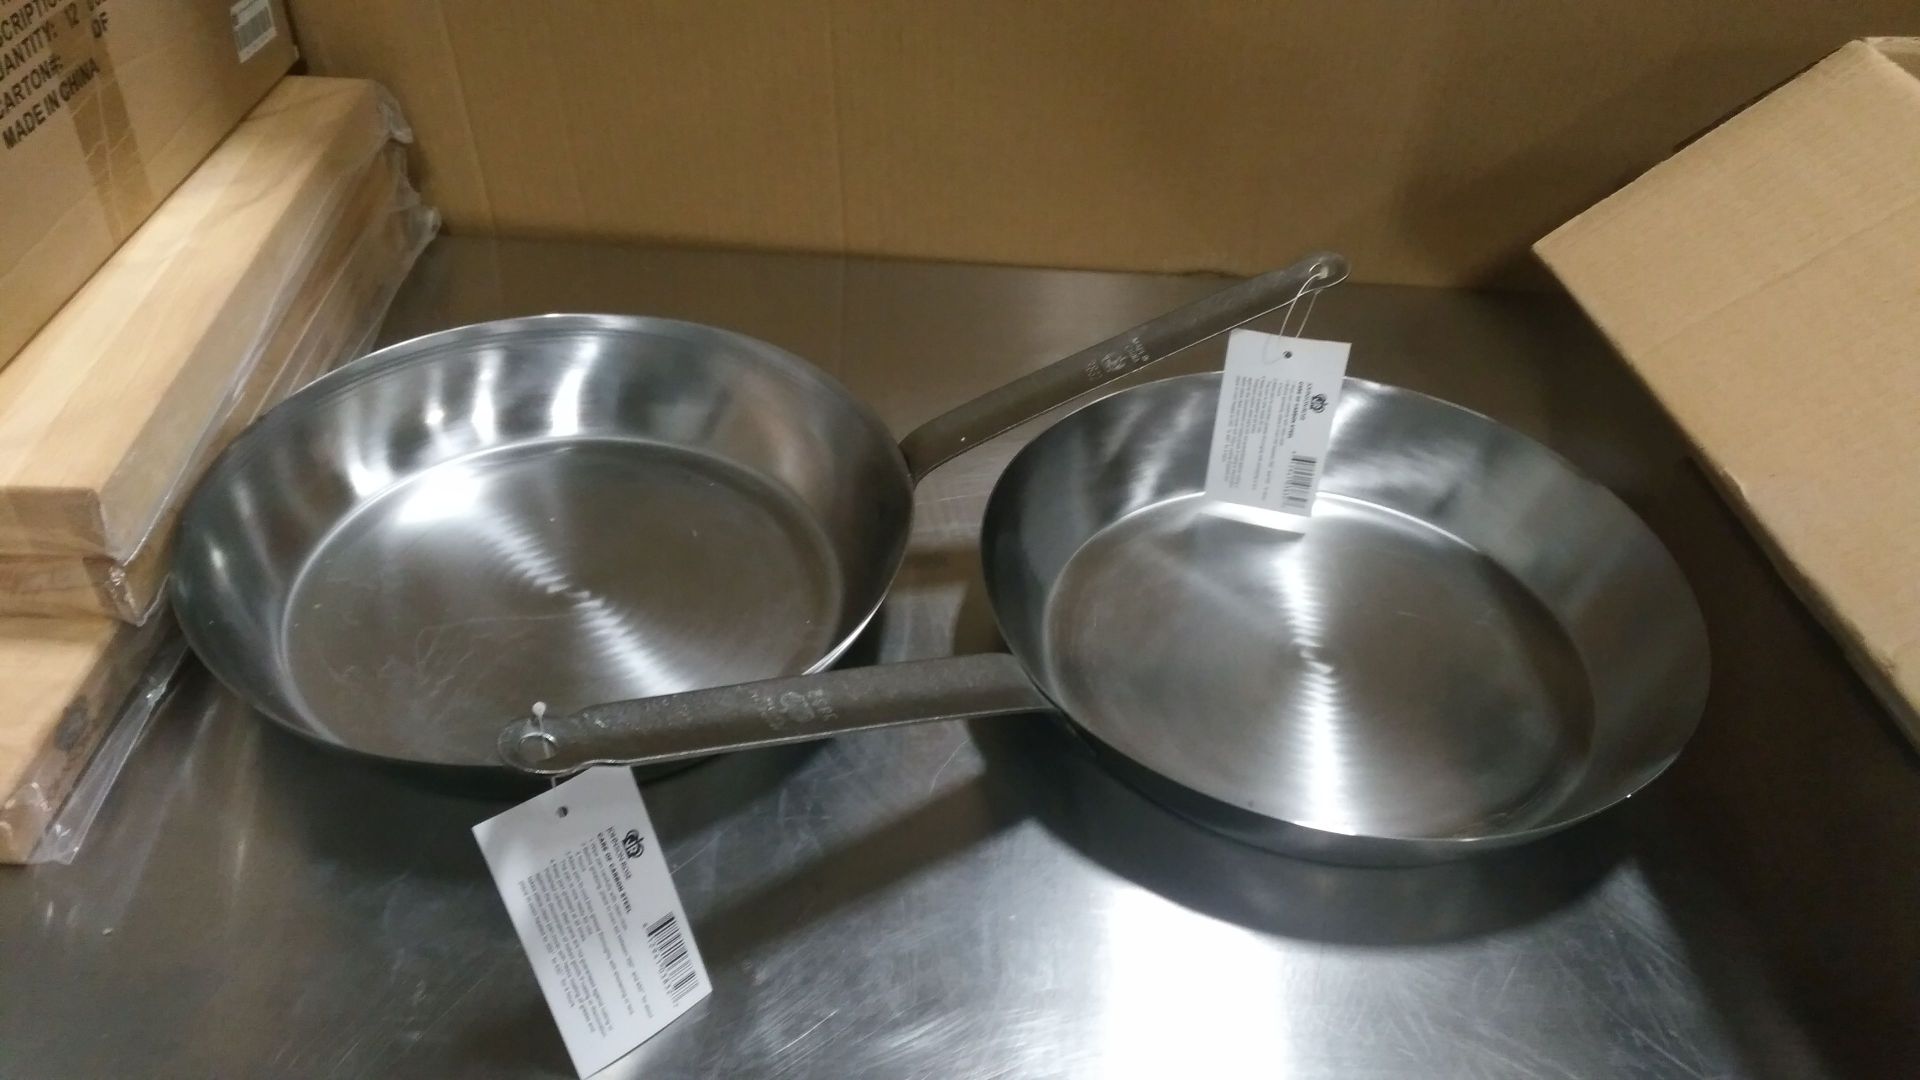 12.5" Carbon Steel Fry Pans - Lot of 2